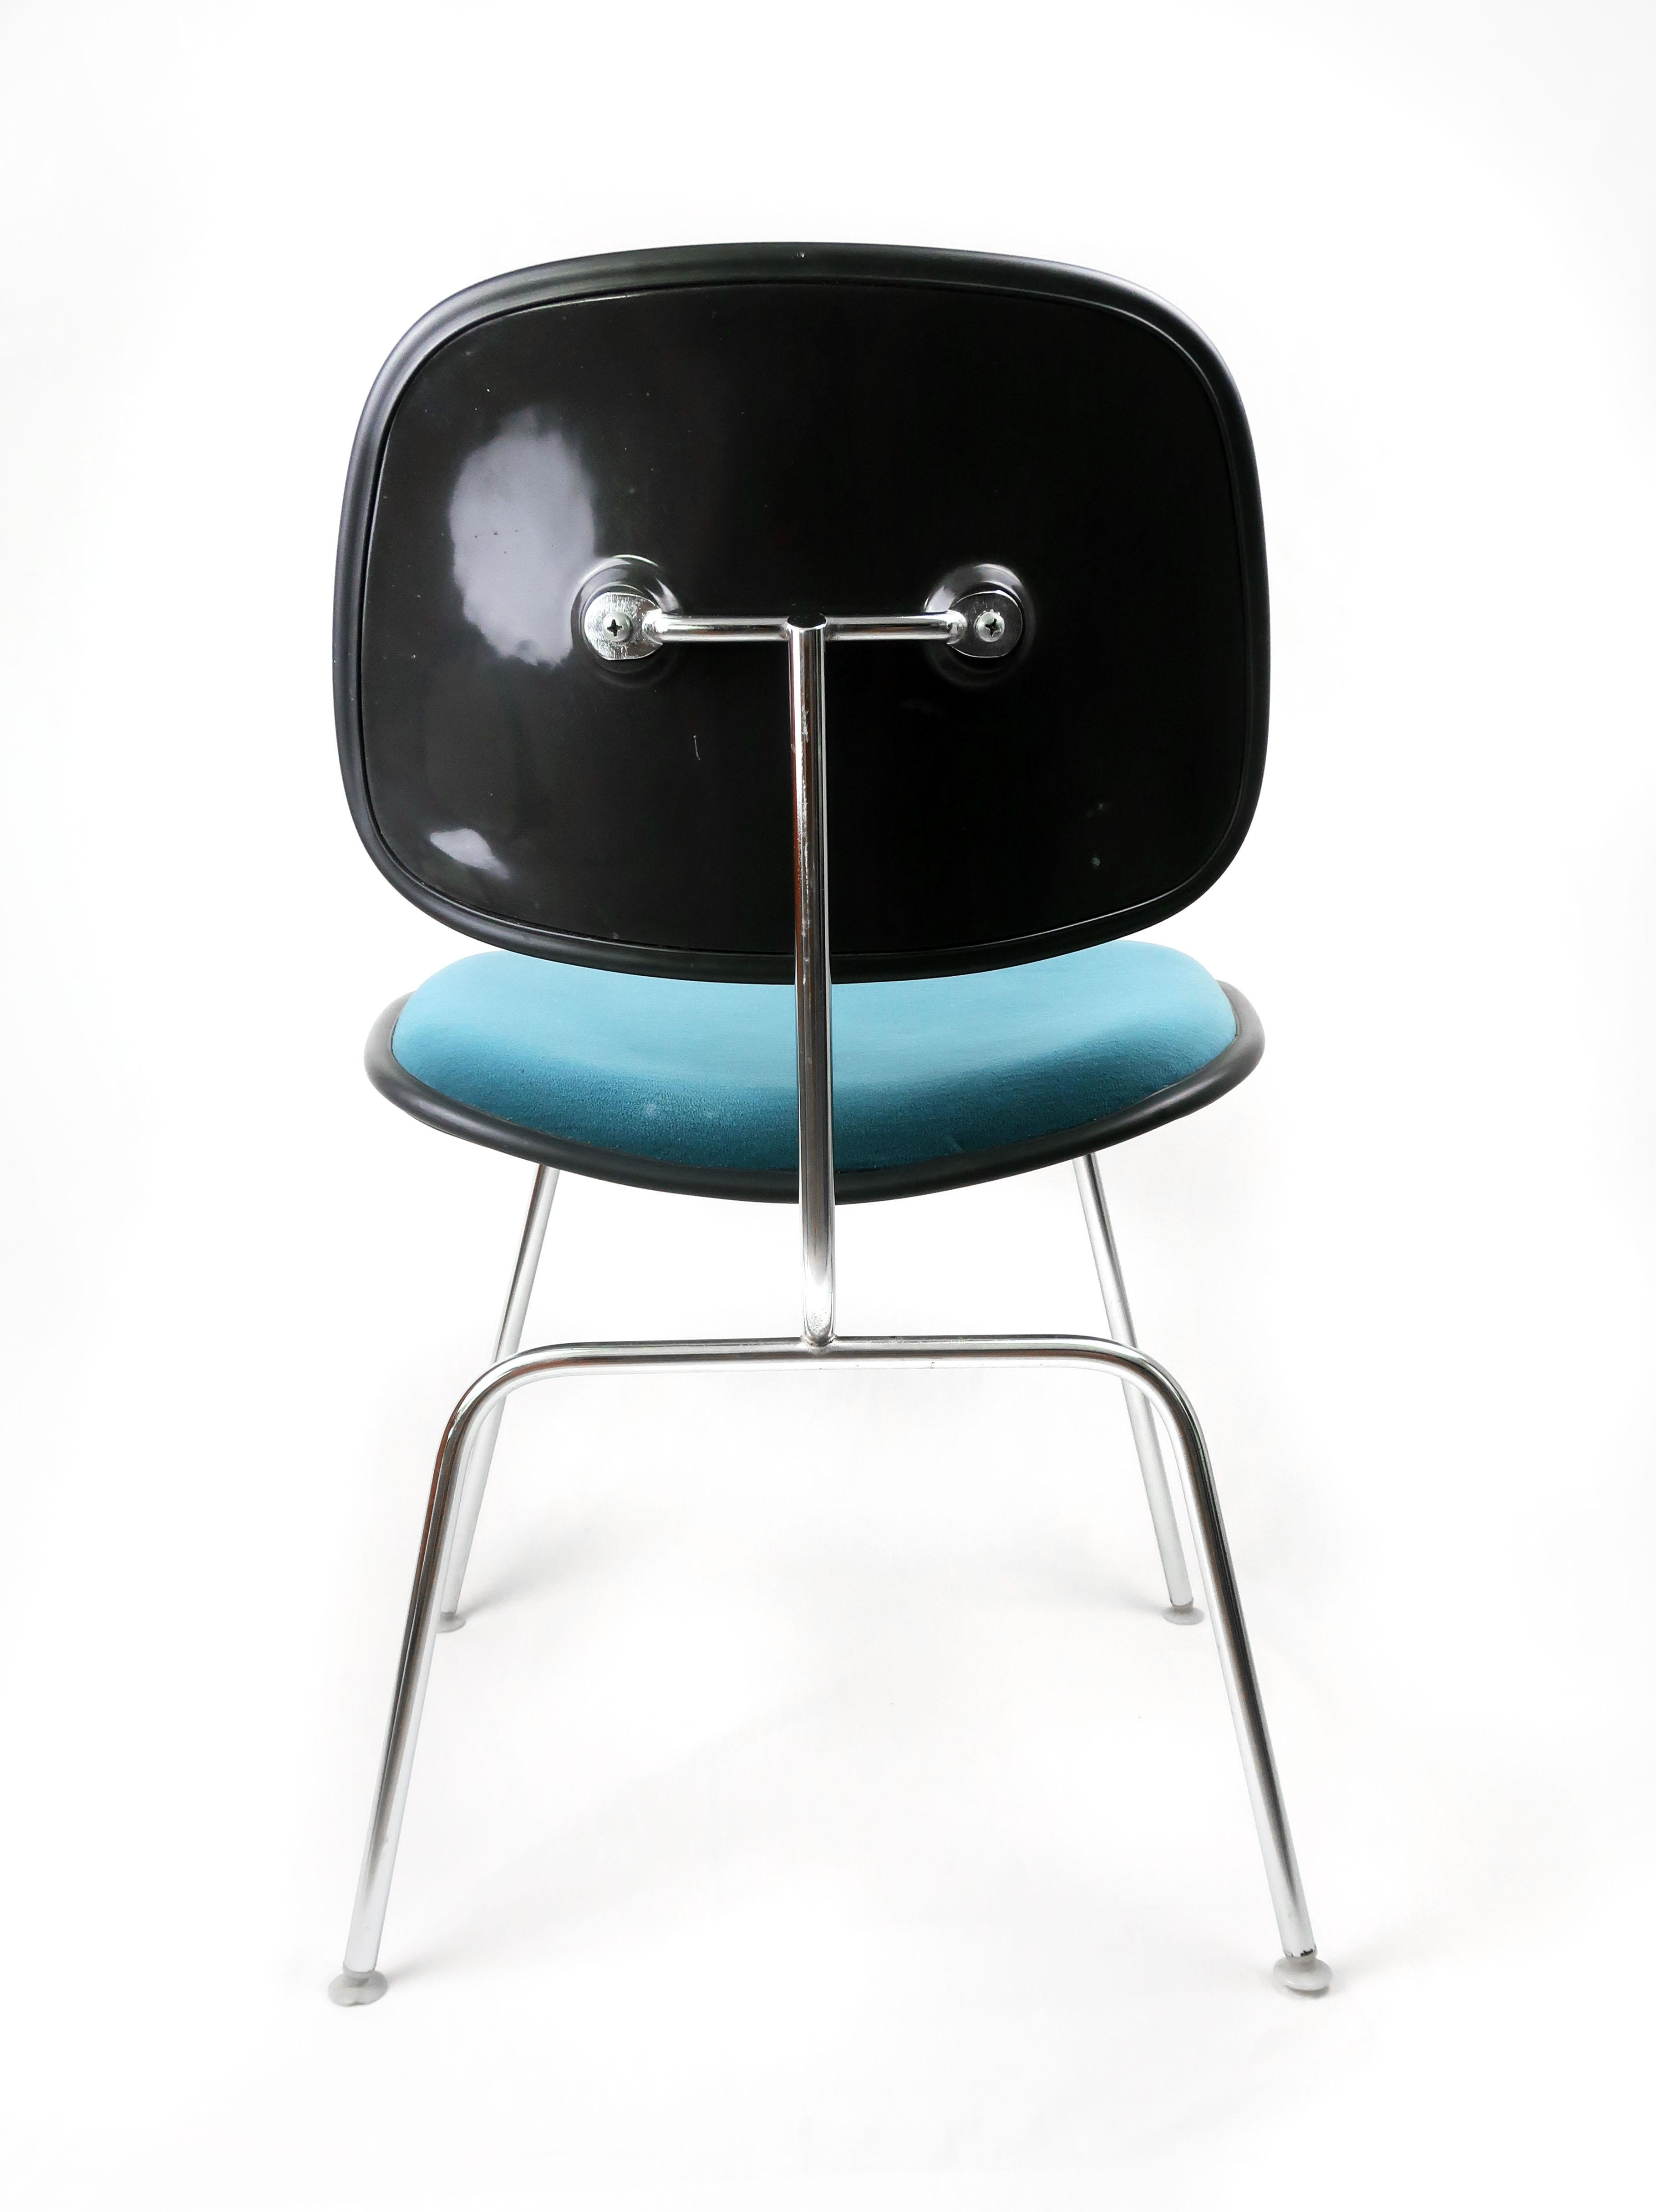 American Vintage Teal Upholstered DCM Chairs by Eames for Herman Miller